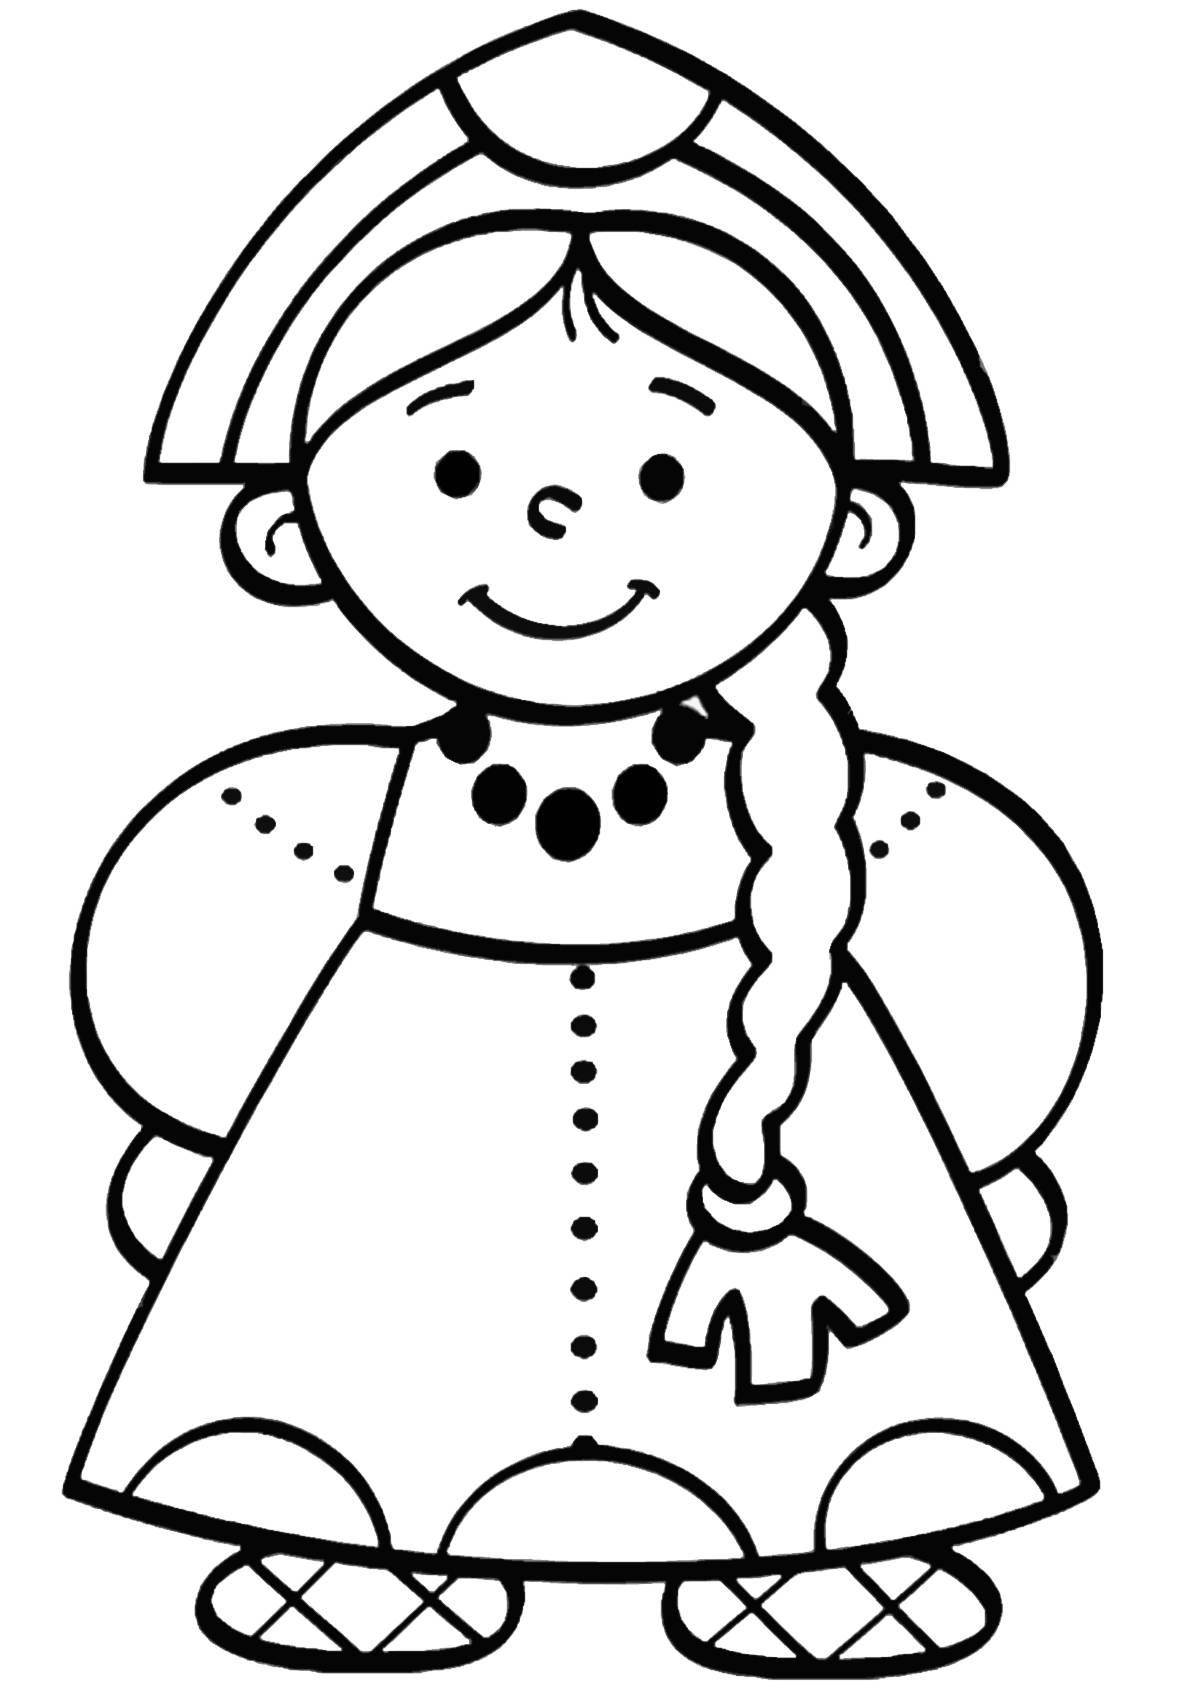 Exquisite doll coloring book for 6-7 year olds